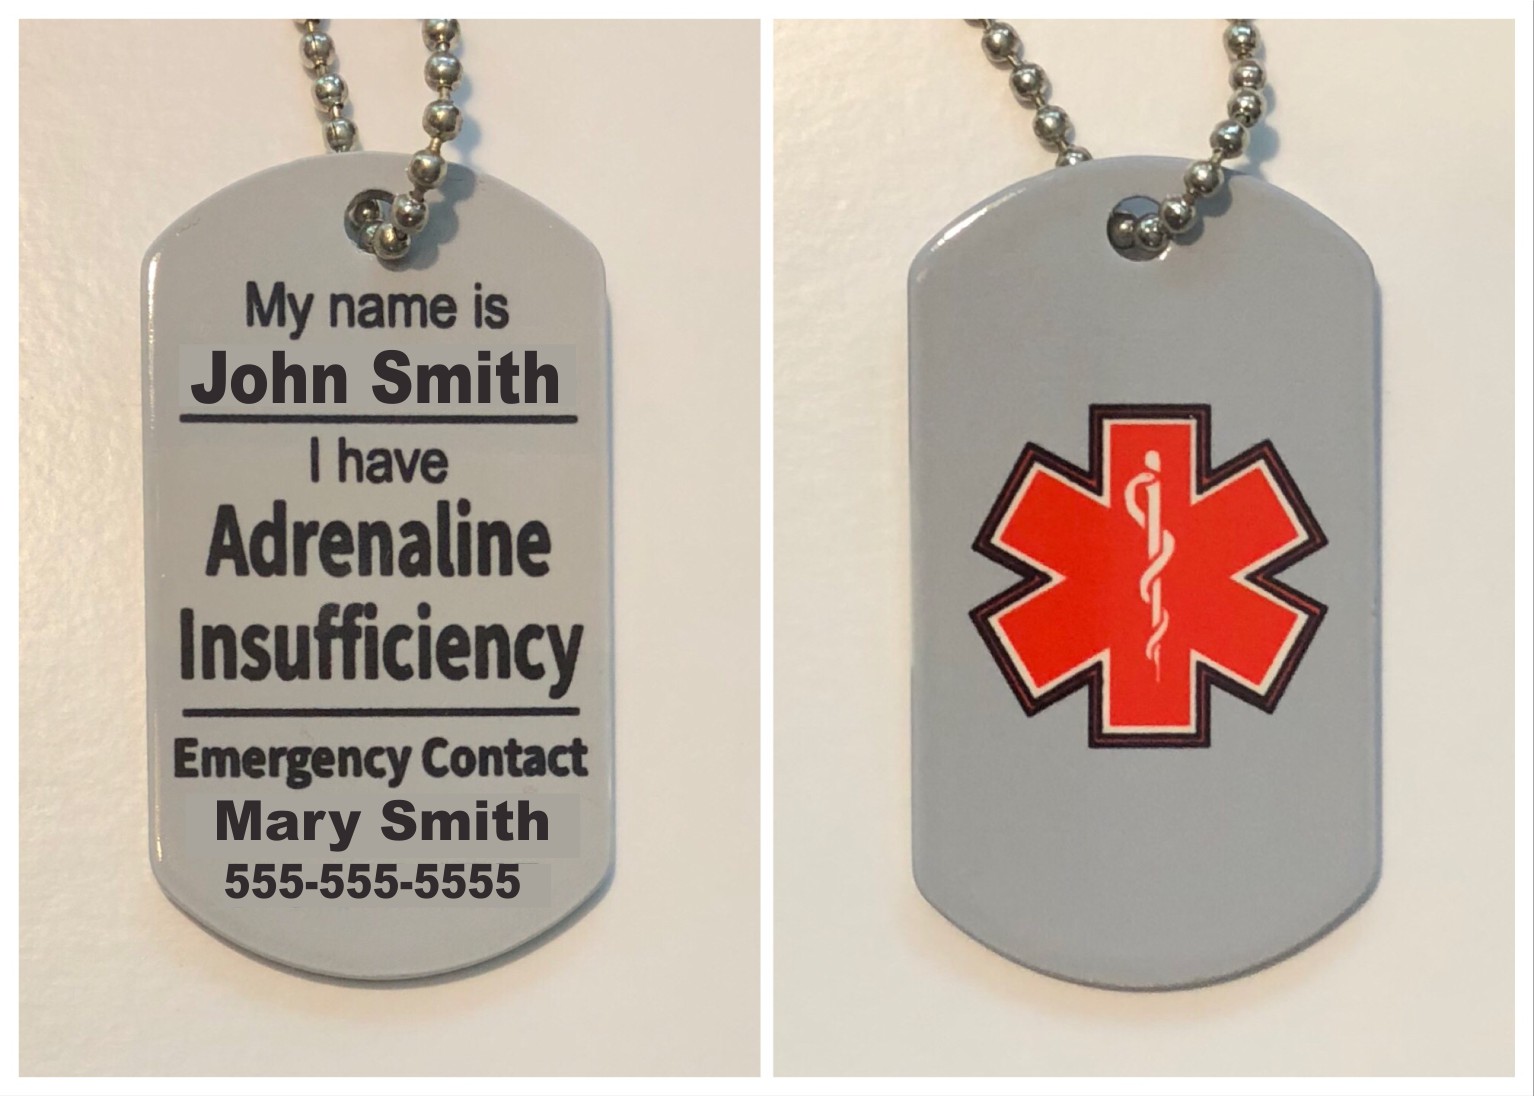 Medic Alert Dog Tag made with sublimation printing